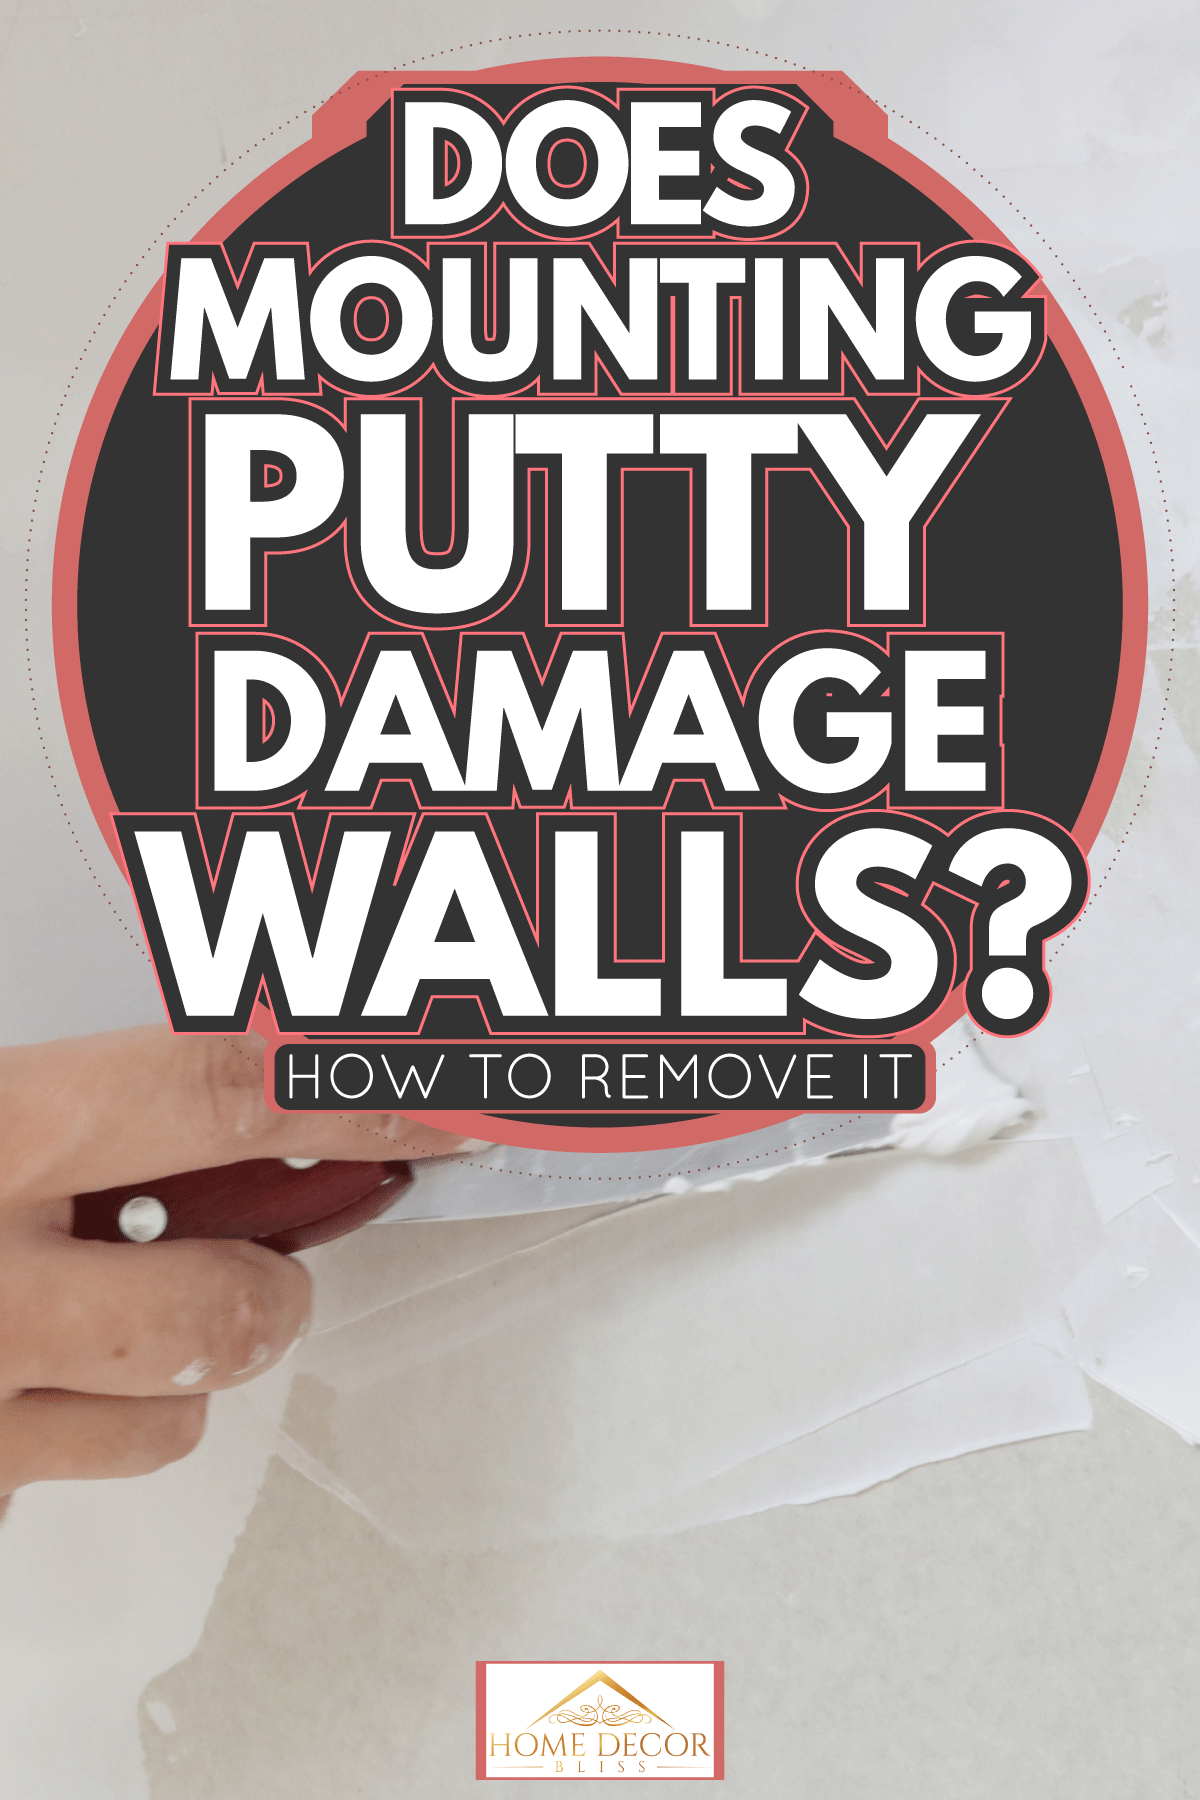 Great places to mount putty, Does mounting putty damage walls? and how to remove it